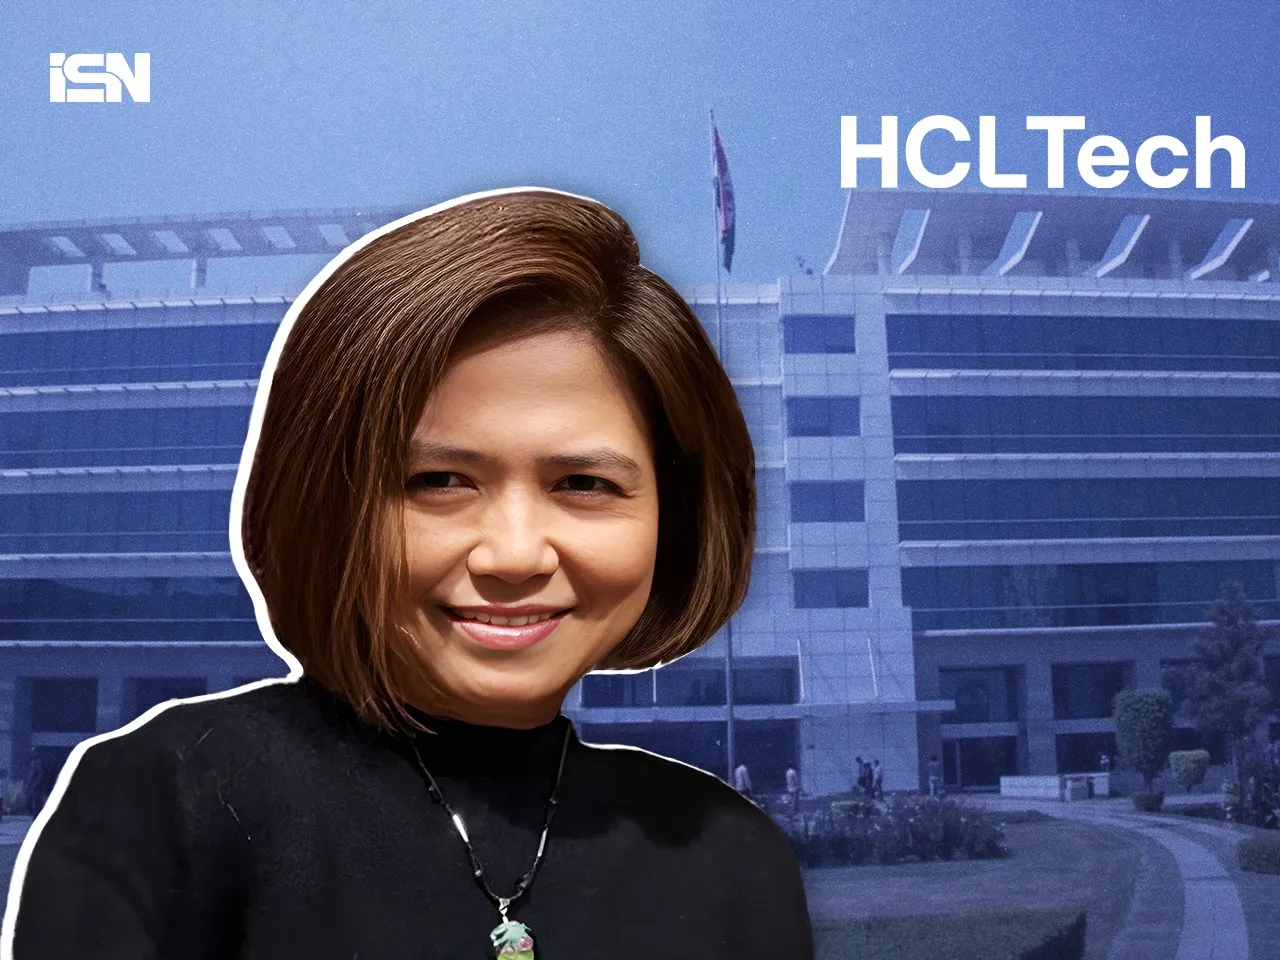 HCLTech appoints Lee Fang Chew